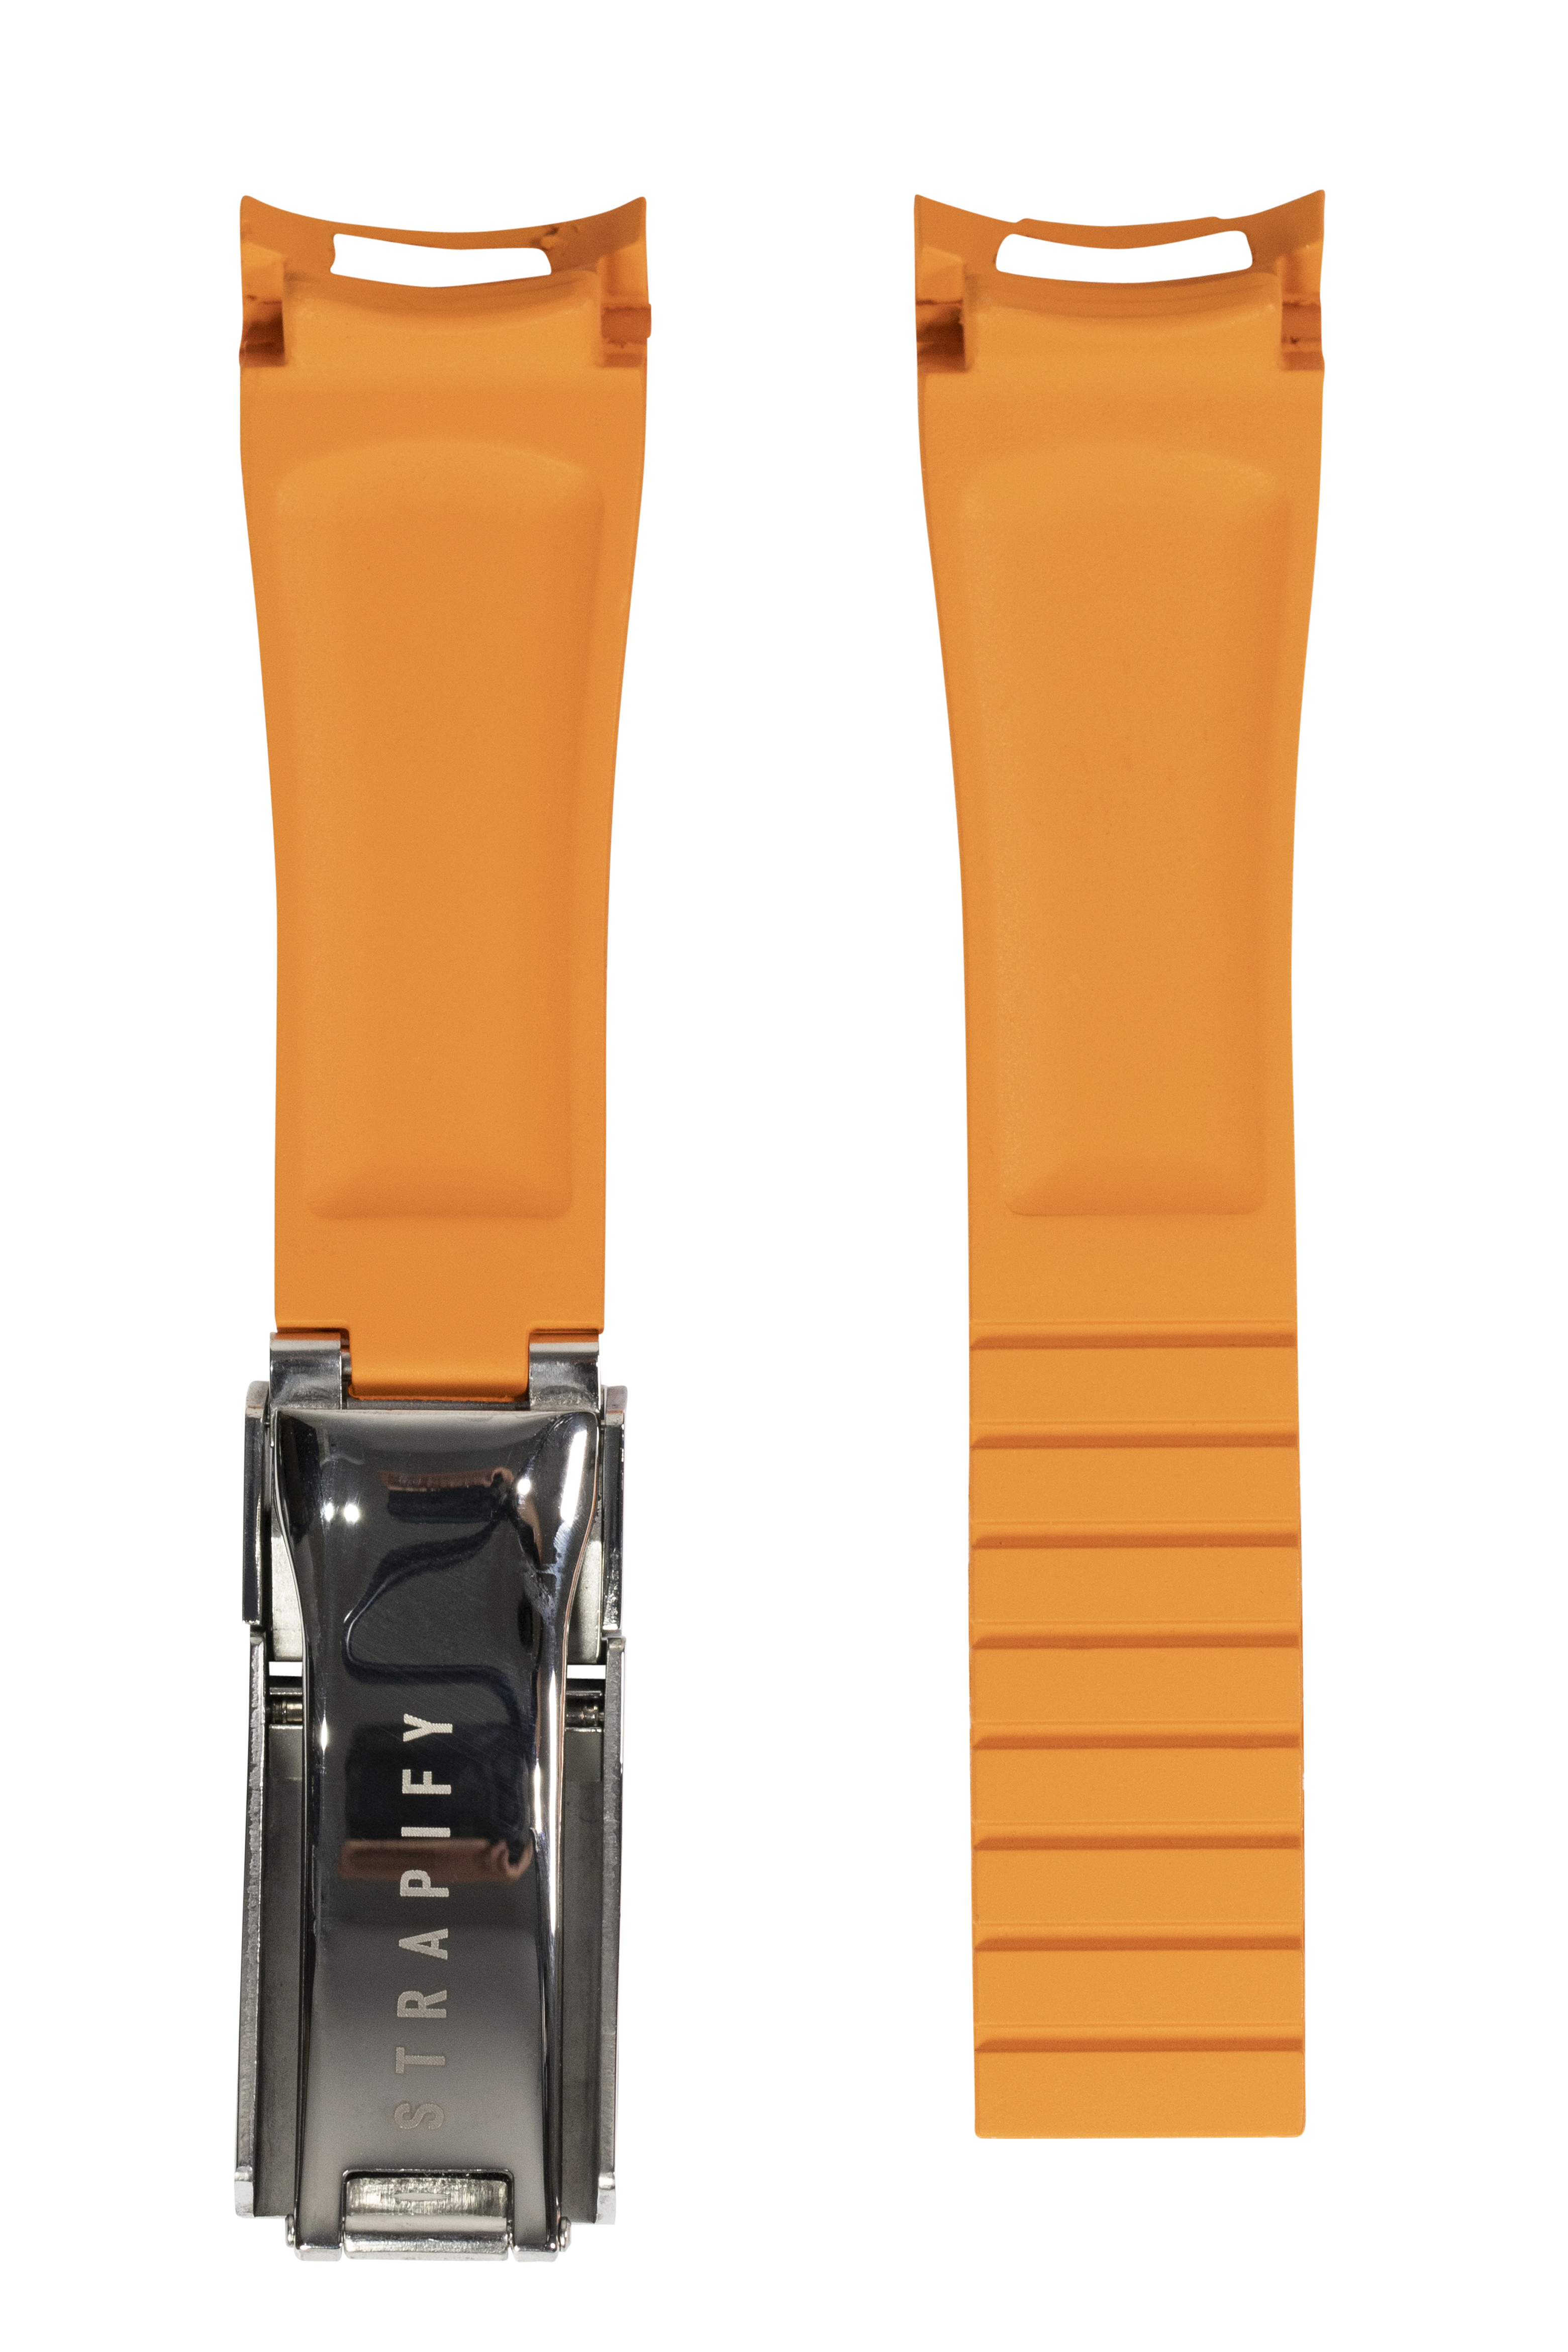 [Curved] Vulcanised Rubber with Oyster Clasp  - Orange